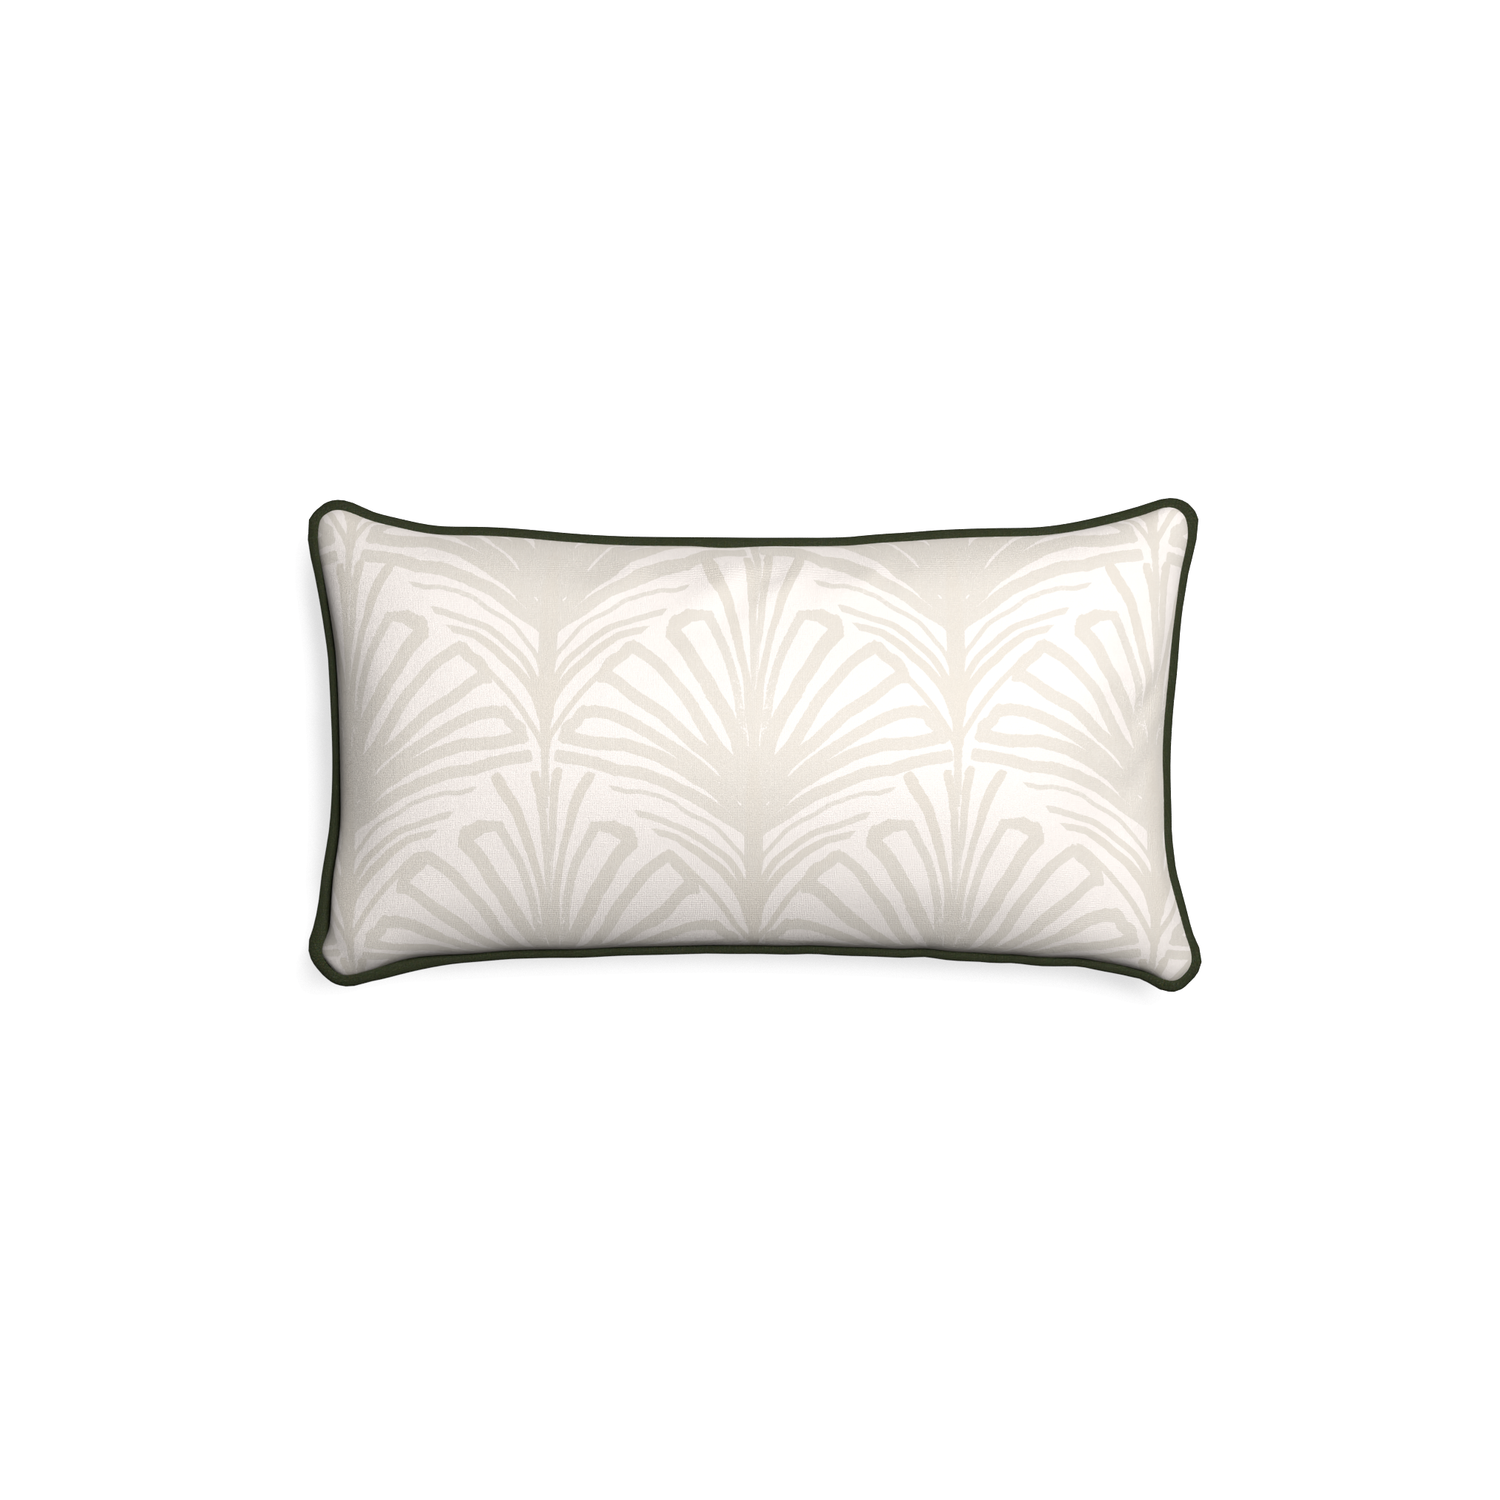 Petite-lumbar suzy sand custom beige palmpillow with f piping on white background